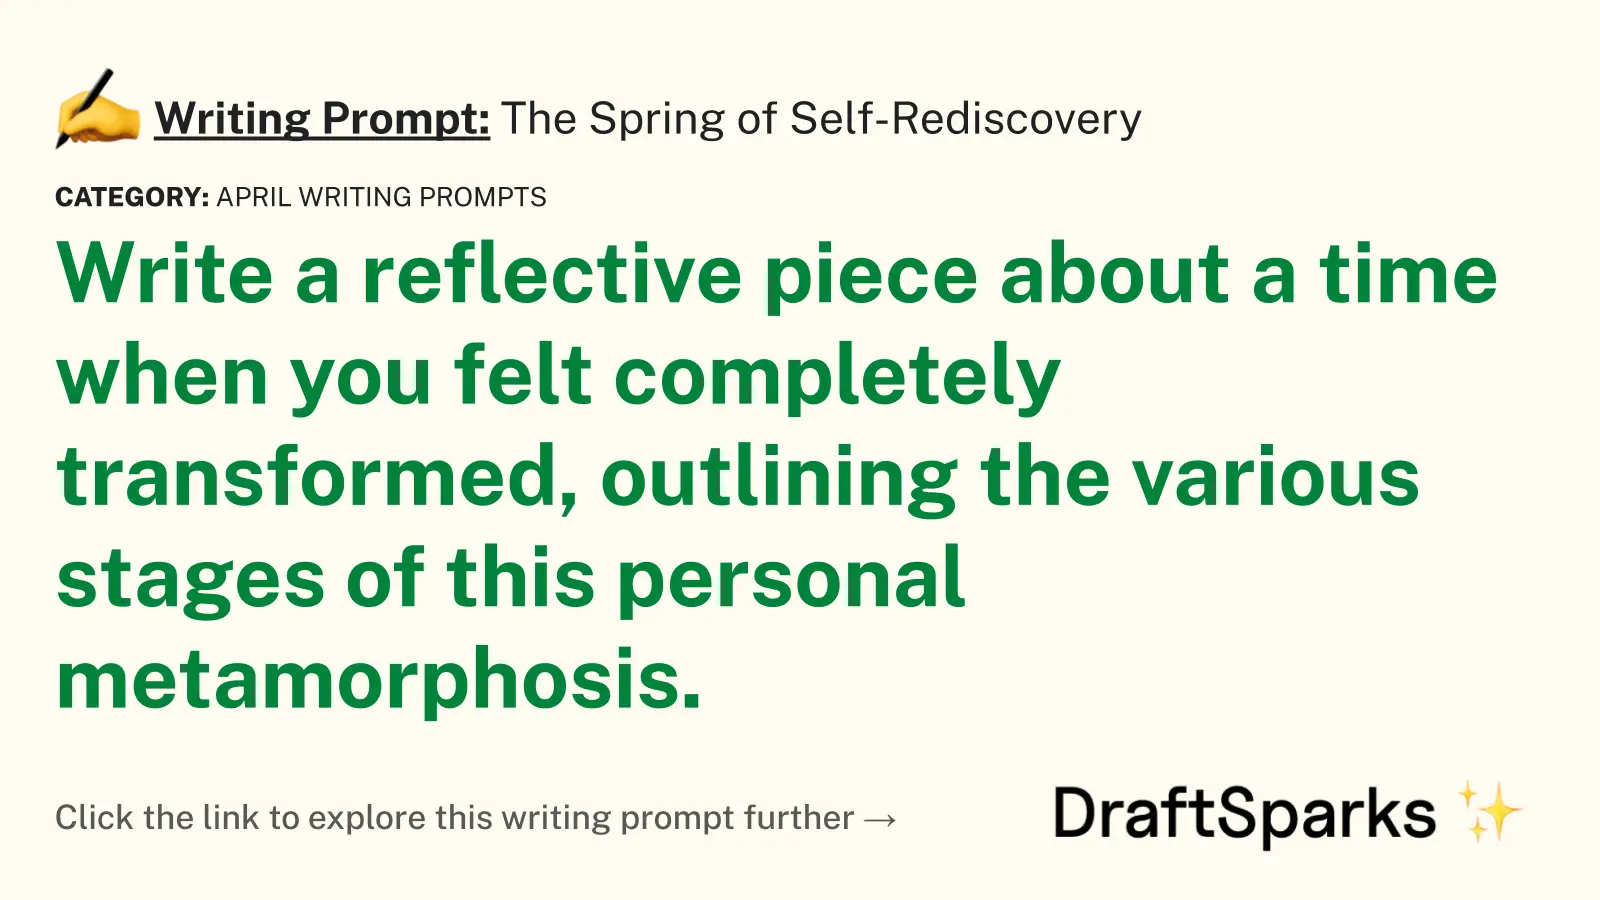 The Spring of Self-Rediscovery